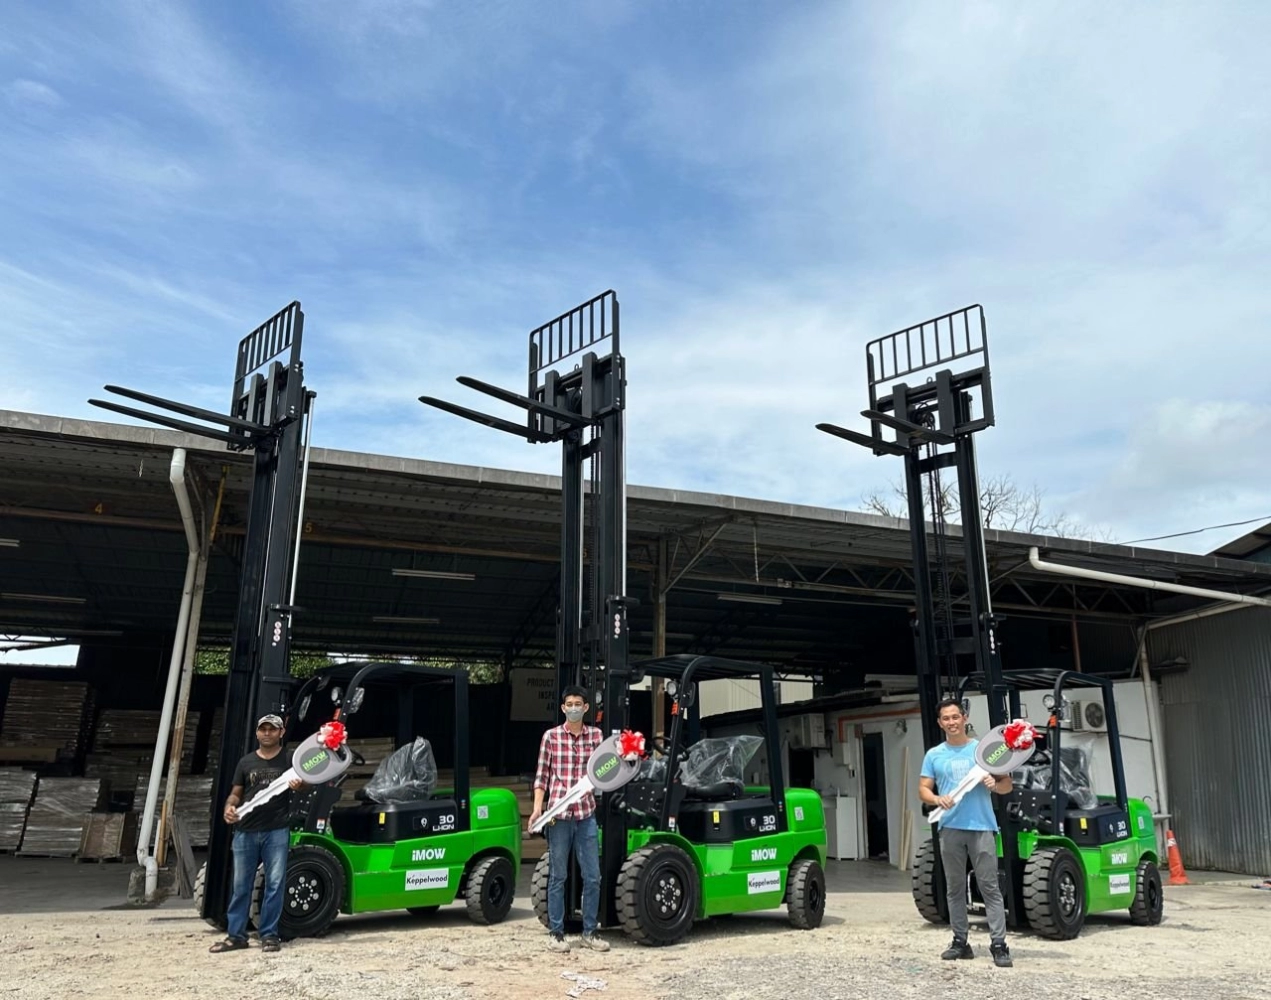 Lithium Forklift By Allied Forklift is benefitting WOOD Industry in Muar